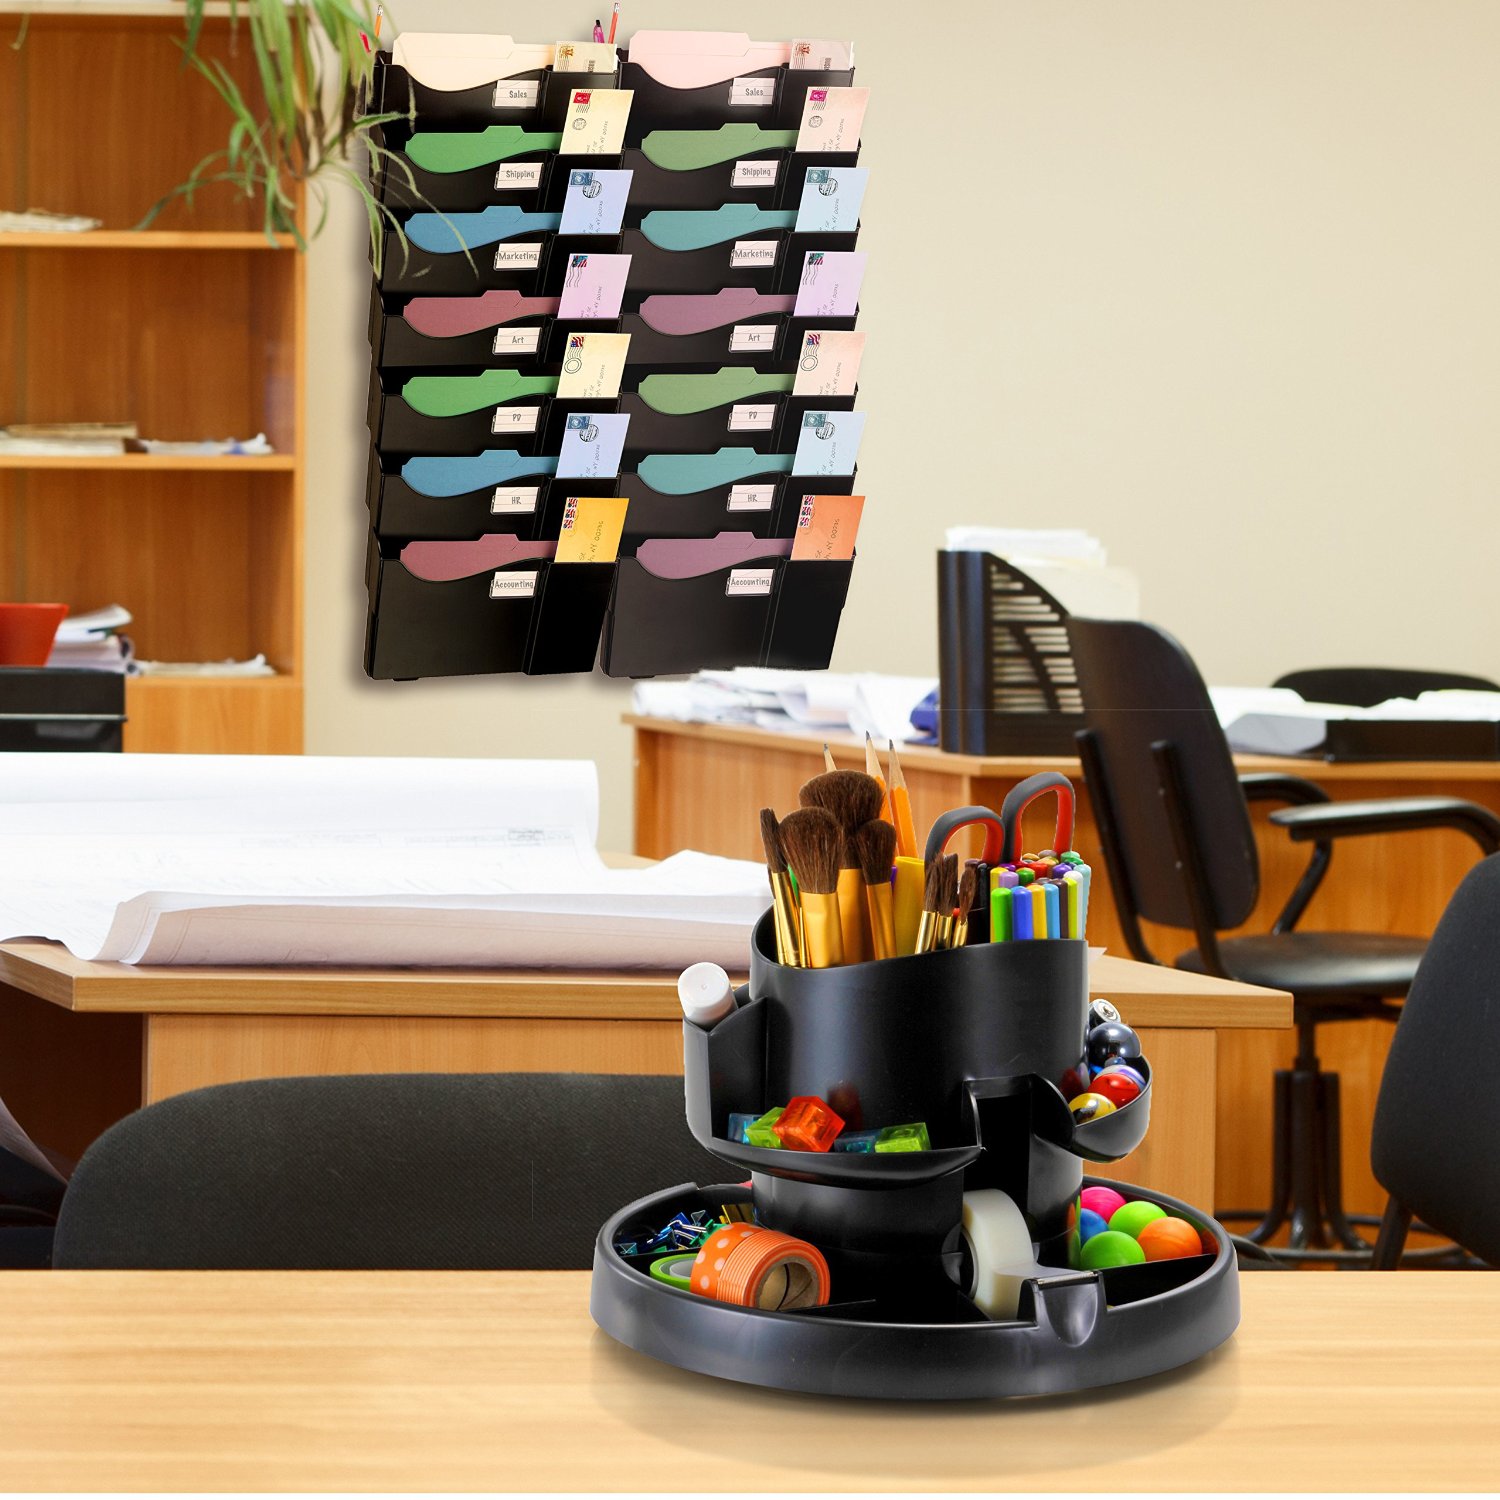 Efficient organization for any office